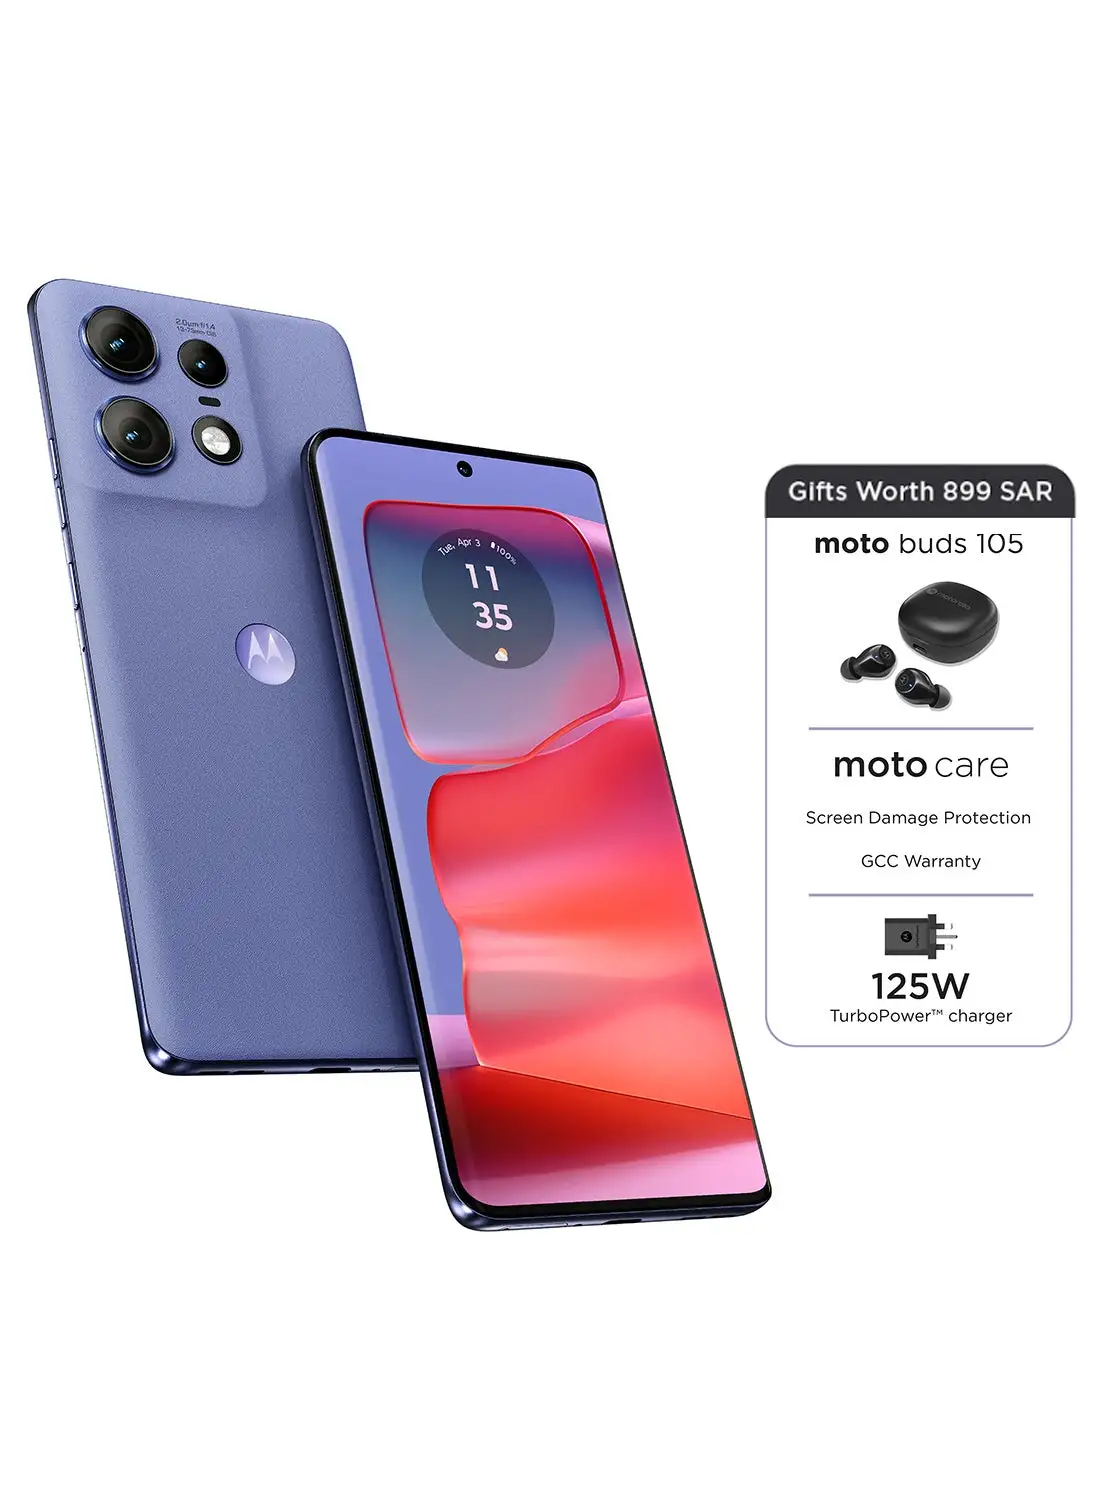 Motorola Edge 50 Pro Dual SIM Luxe Lavender 12GB+12GB RAM 512GB 5G With Buds And Accidental Damage Protection - Middle East Version